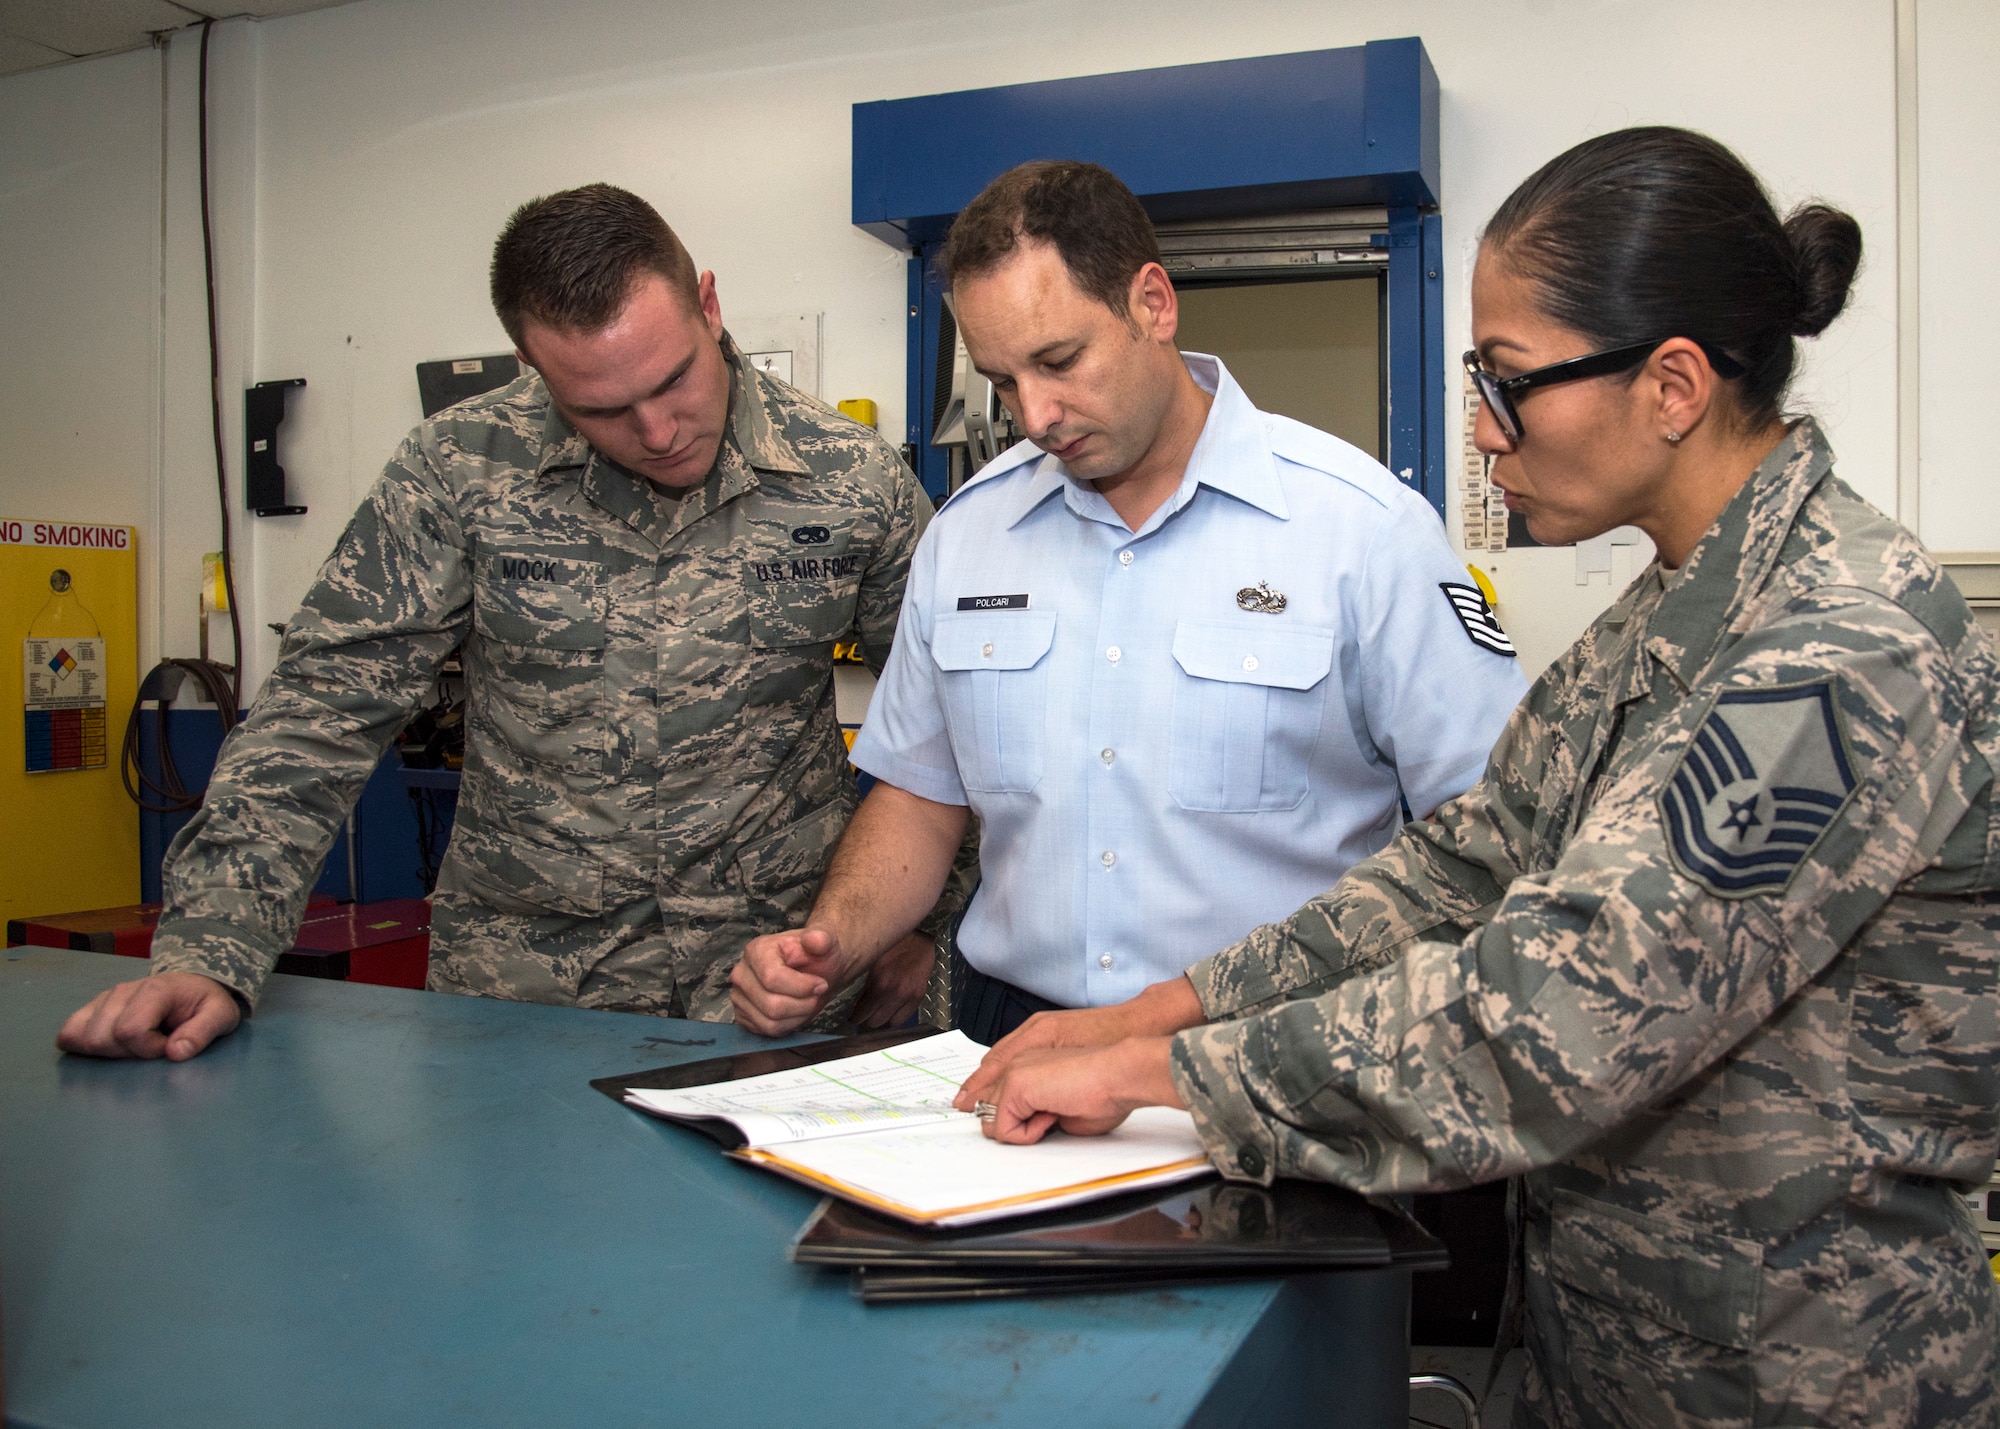 U.S. Air Force Master Sgt. Mandy Thorpe, right, lead inspection planner assigned to the 6th Air Mobility Wing Inspector General office, reviews 6th Maintenance Squadron (MXS) unit type codes with Tech. Sgt. Patrick Polcari, center, 6th MXS unit deployment manager and Senior Airman Jean-Paul Mock, 6th MXS aircraft structural journeyman, left, during a Horizontal Inspection at MacDill Air Force Base, Fla., April 30, 2018. This inspection is a wing-level program that verifies the readiness of multiple units.